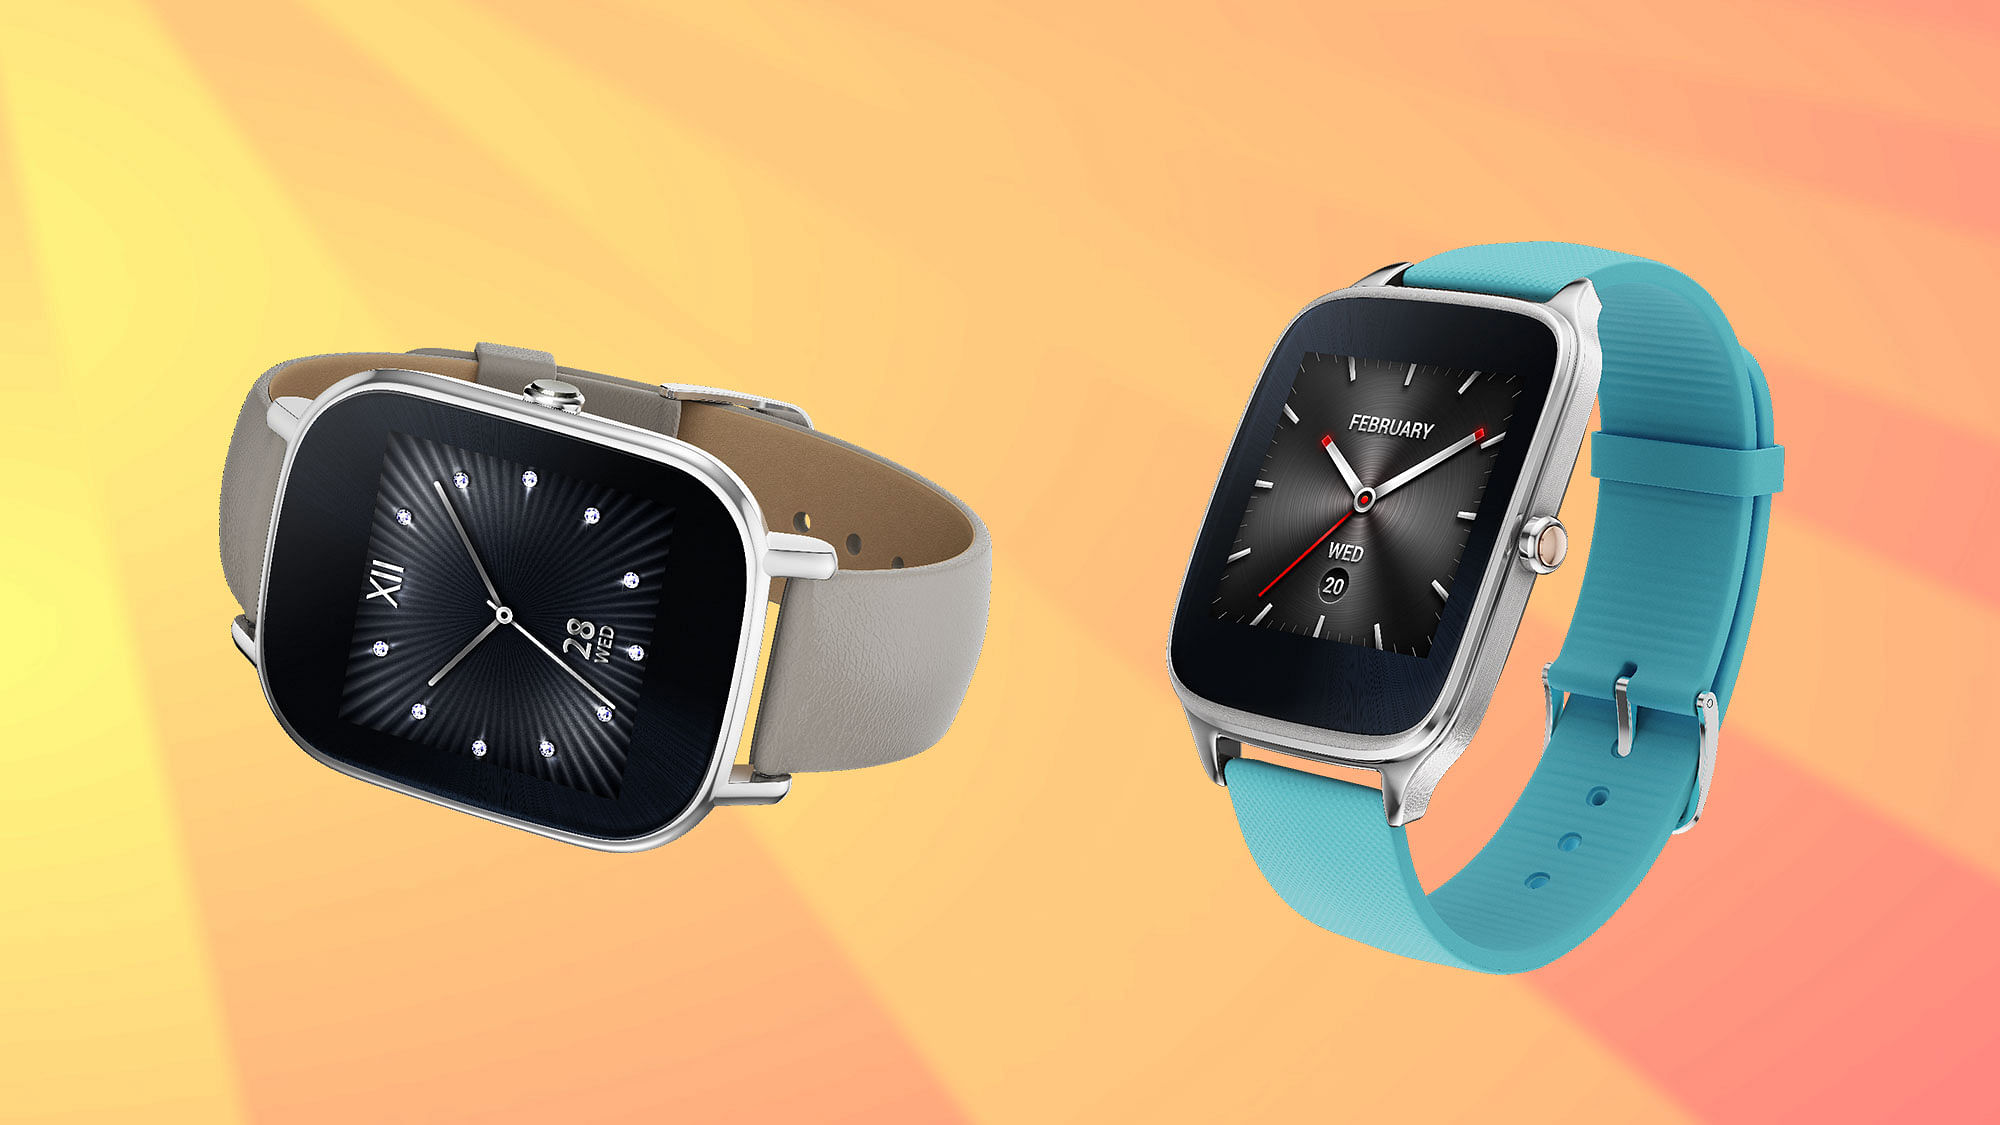 Asus Zenwatch 2. (Photo Courtesy: Asus)